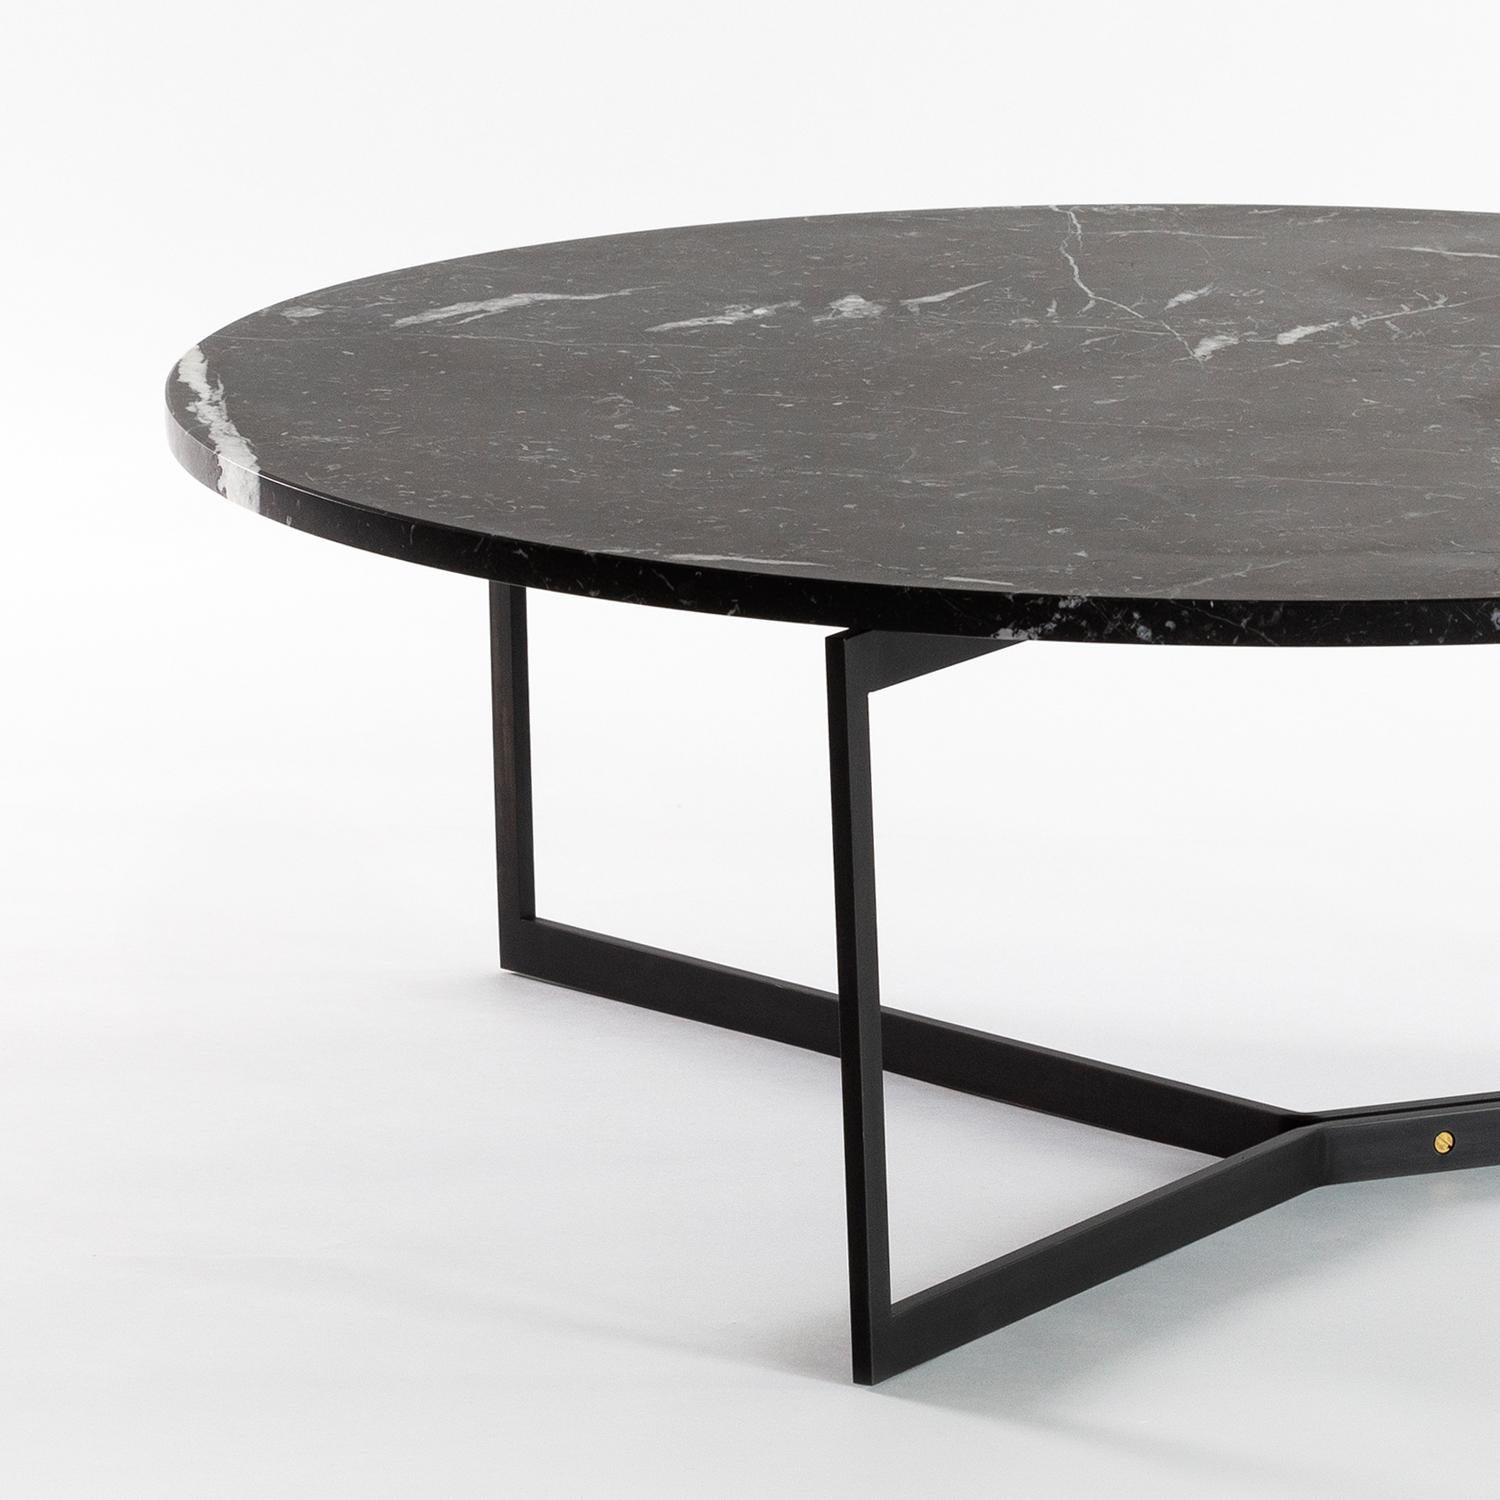 AT14 is a handmade coffee table with a sleek crafted metal base and polished marble or hardwood tabletop

Shown in Nero Marquina marble and blackened cold-rolled steel with bronze accents. 

Dimensions: 36” diameter x 14” height 

All of our solid